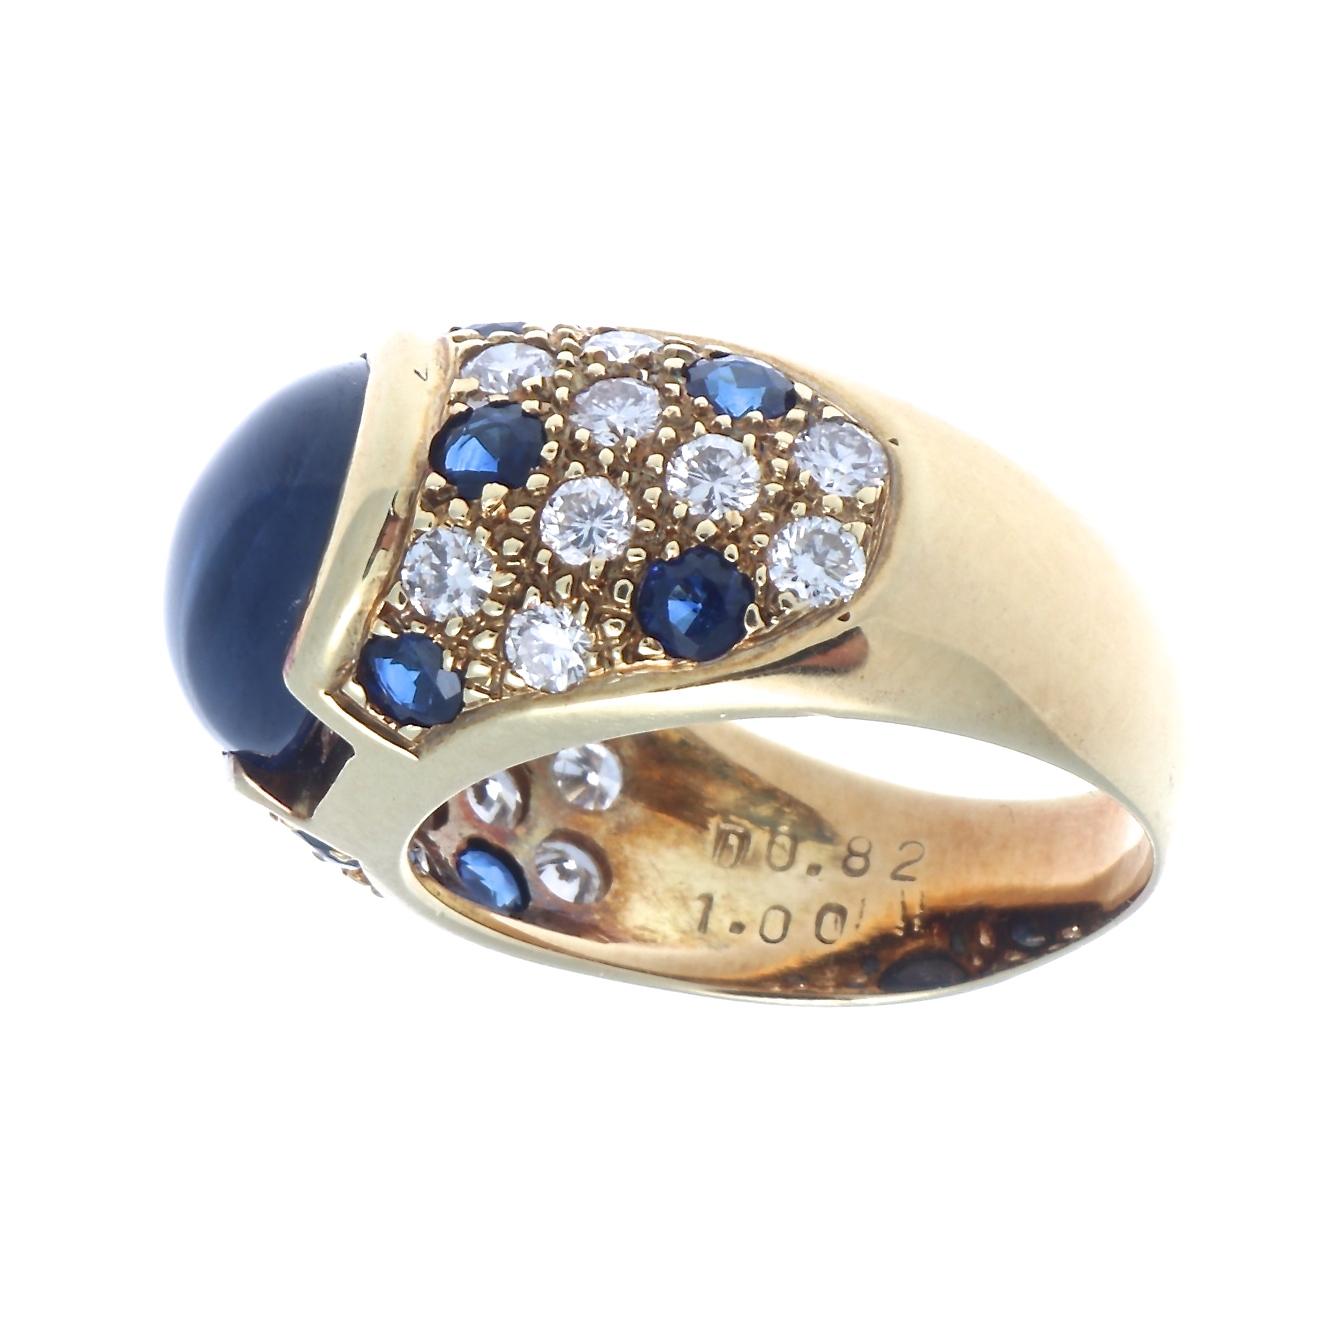 Bold yet graceful, a look that inspires commentary on the nature of feminine power.  Featuring a royal blue cabochon cut sapphire accented with diamonds and sapphires. Crafted in 18k gold. Ring size 6-3/4 and can easily be resized to fit, if needed